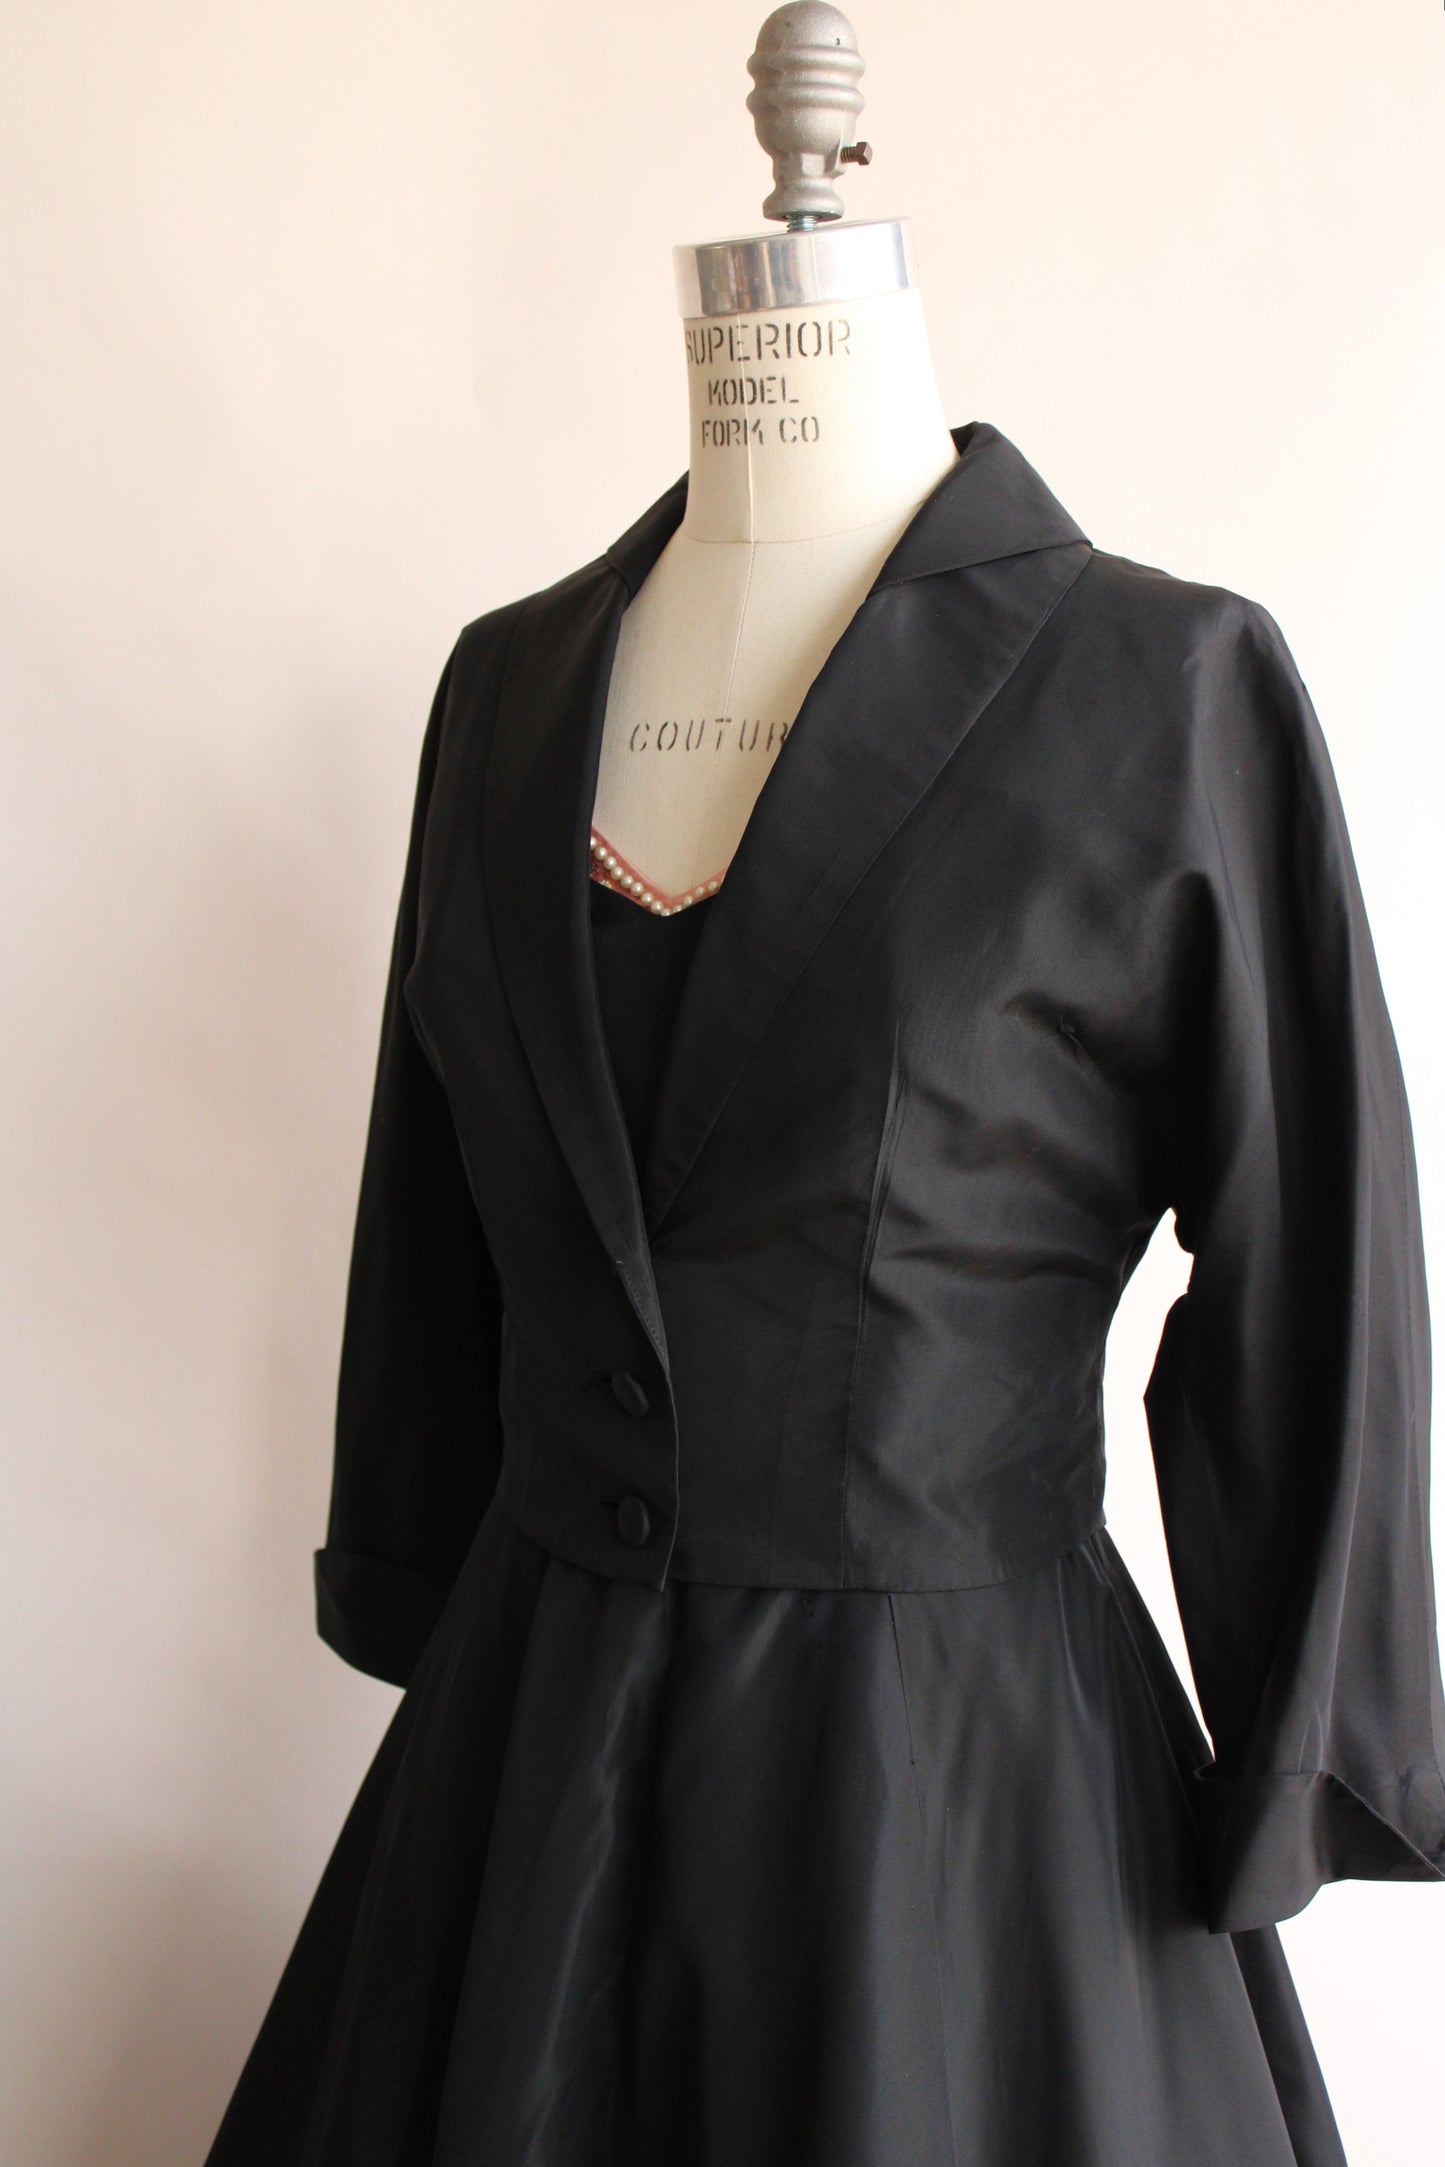 Vintage 1950s New Look Black and Pink Dress with Jacket